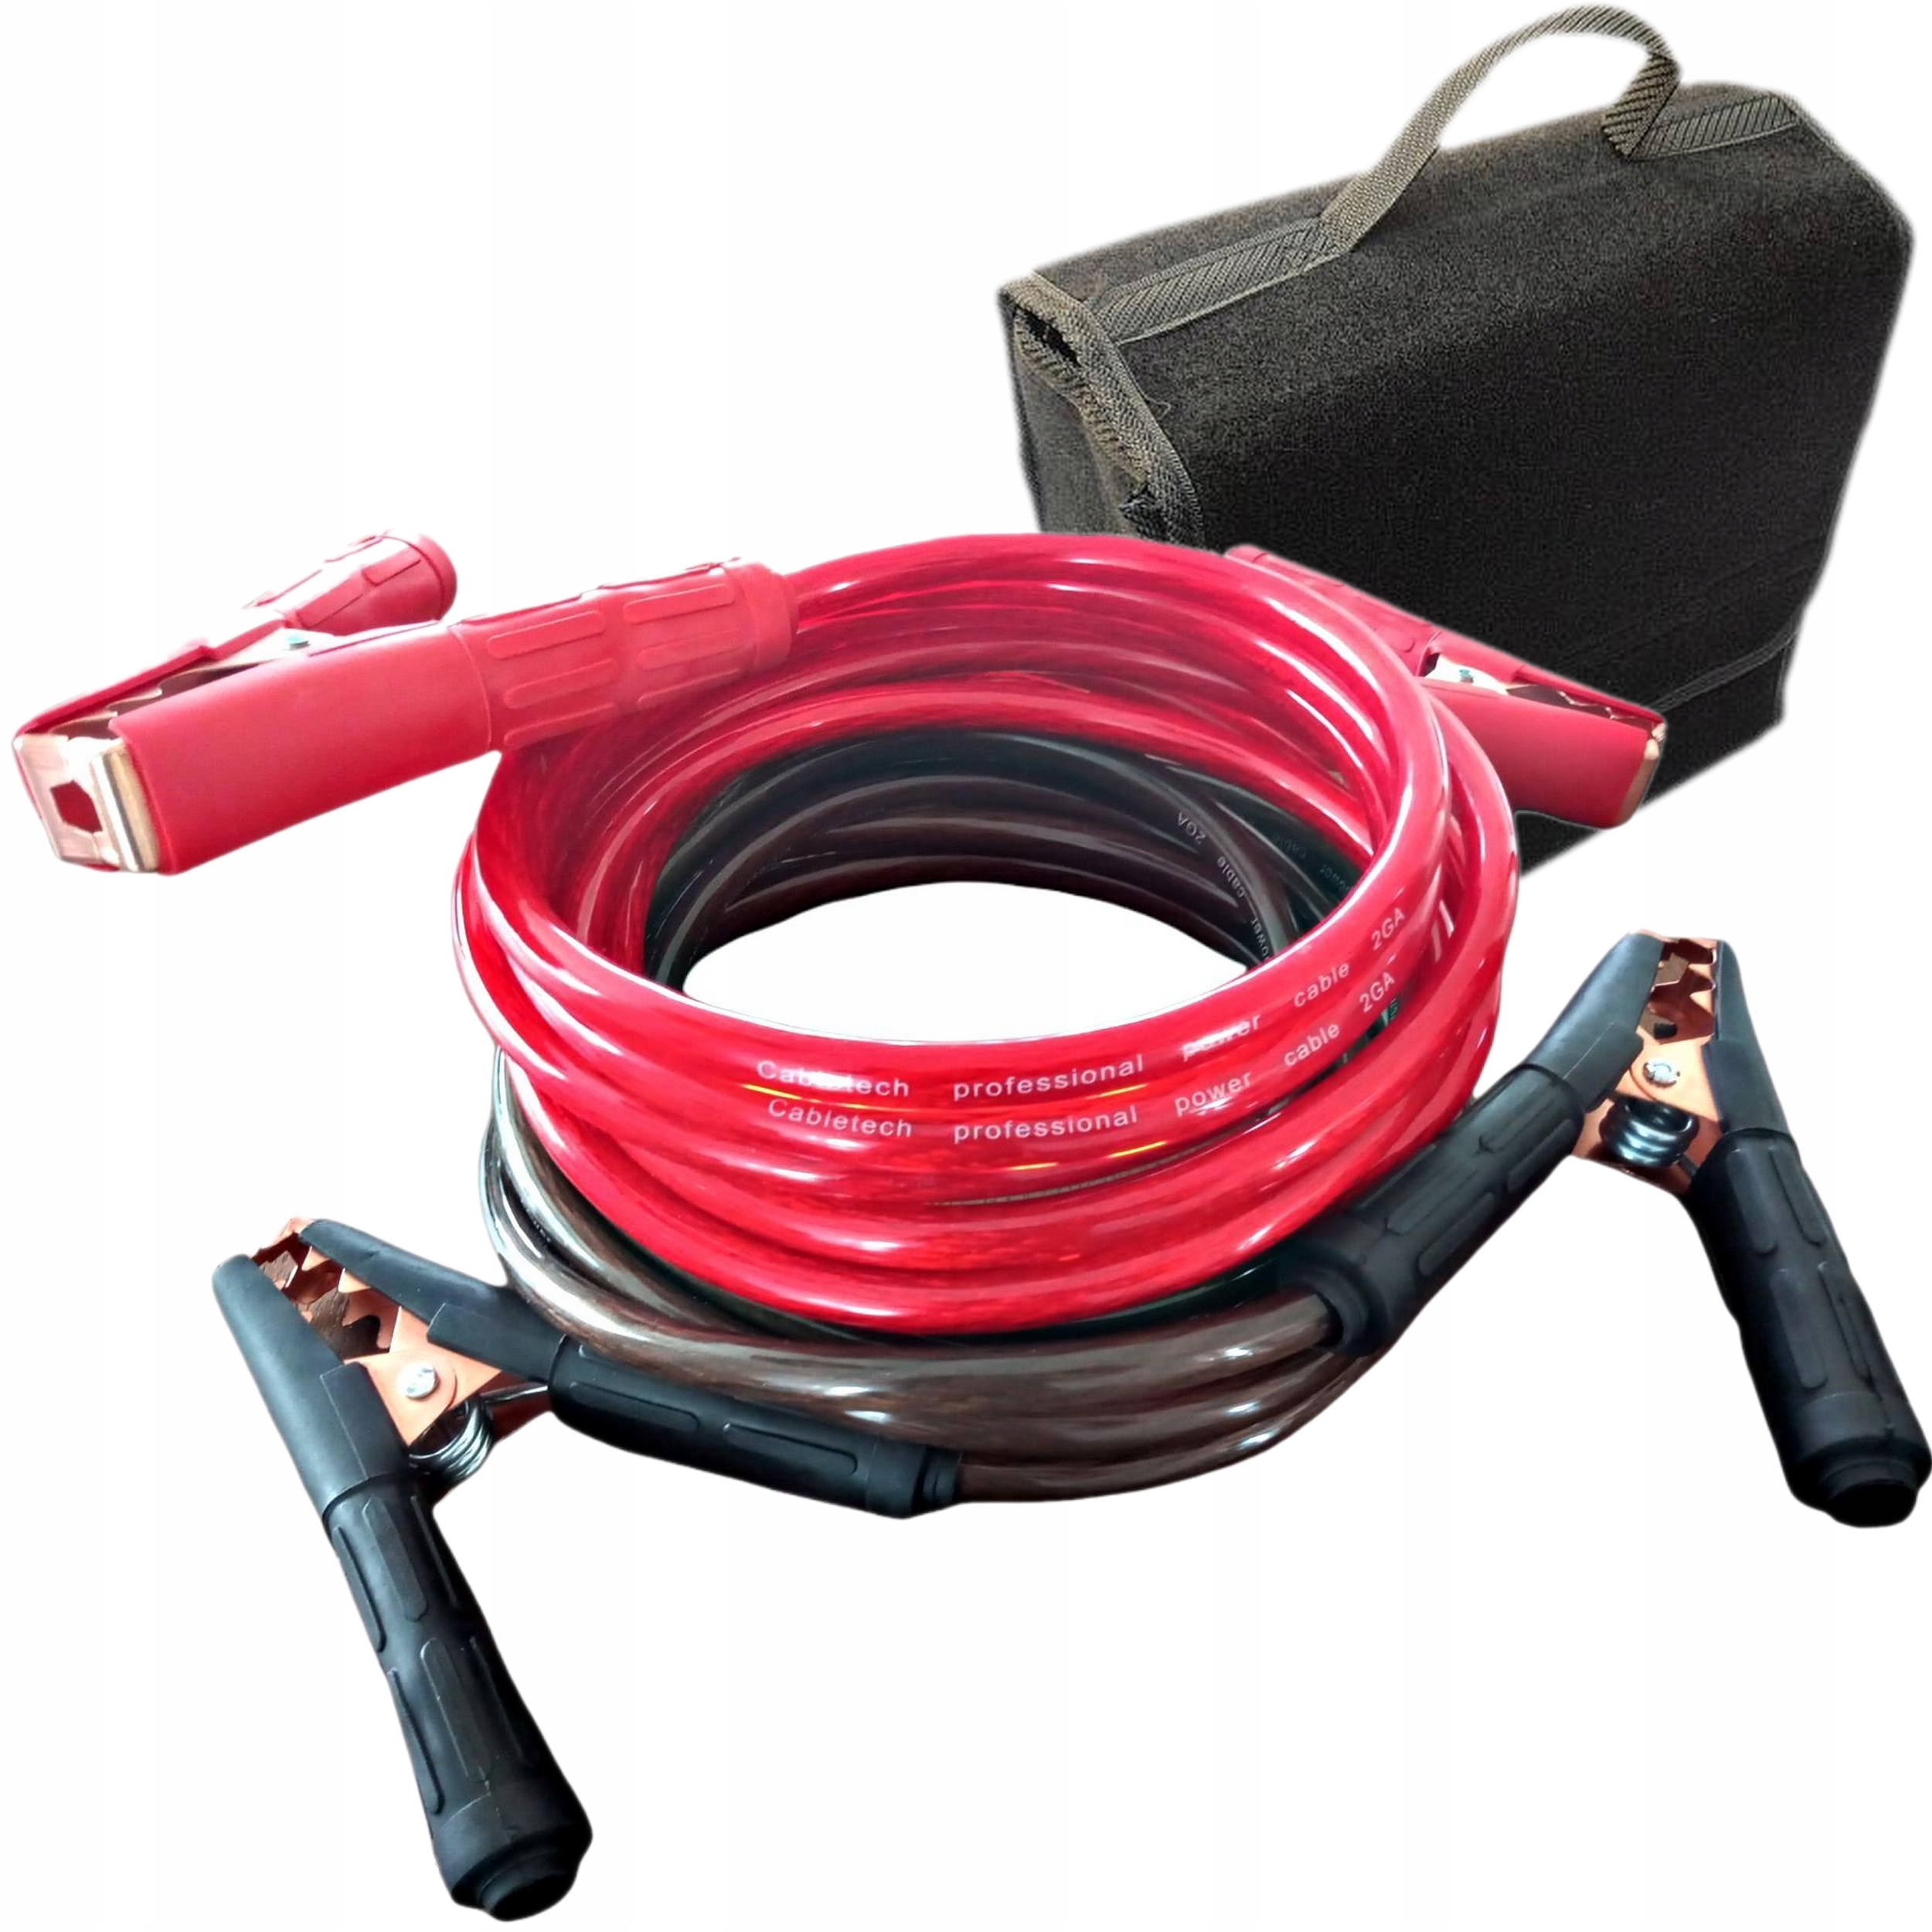 JUMP CABLES 35MM2 VERY STRONG TIR BUS-6m